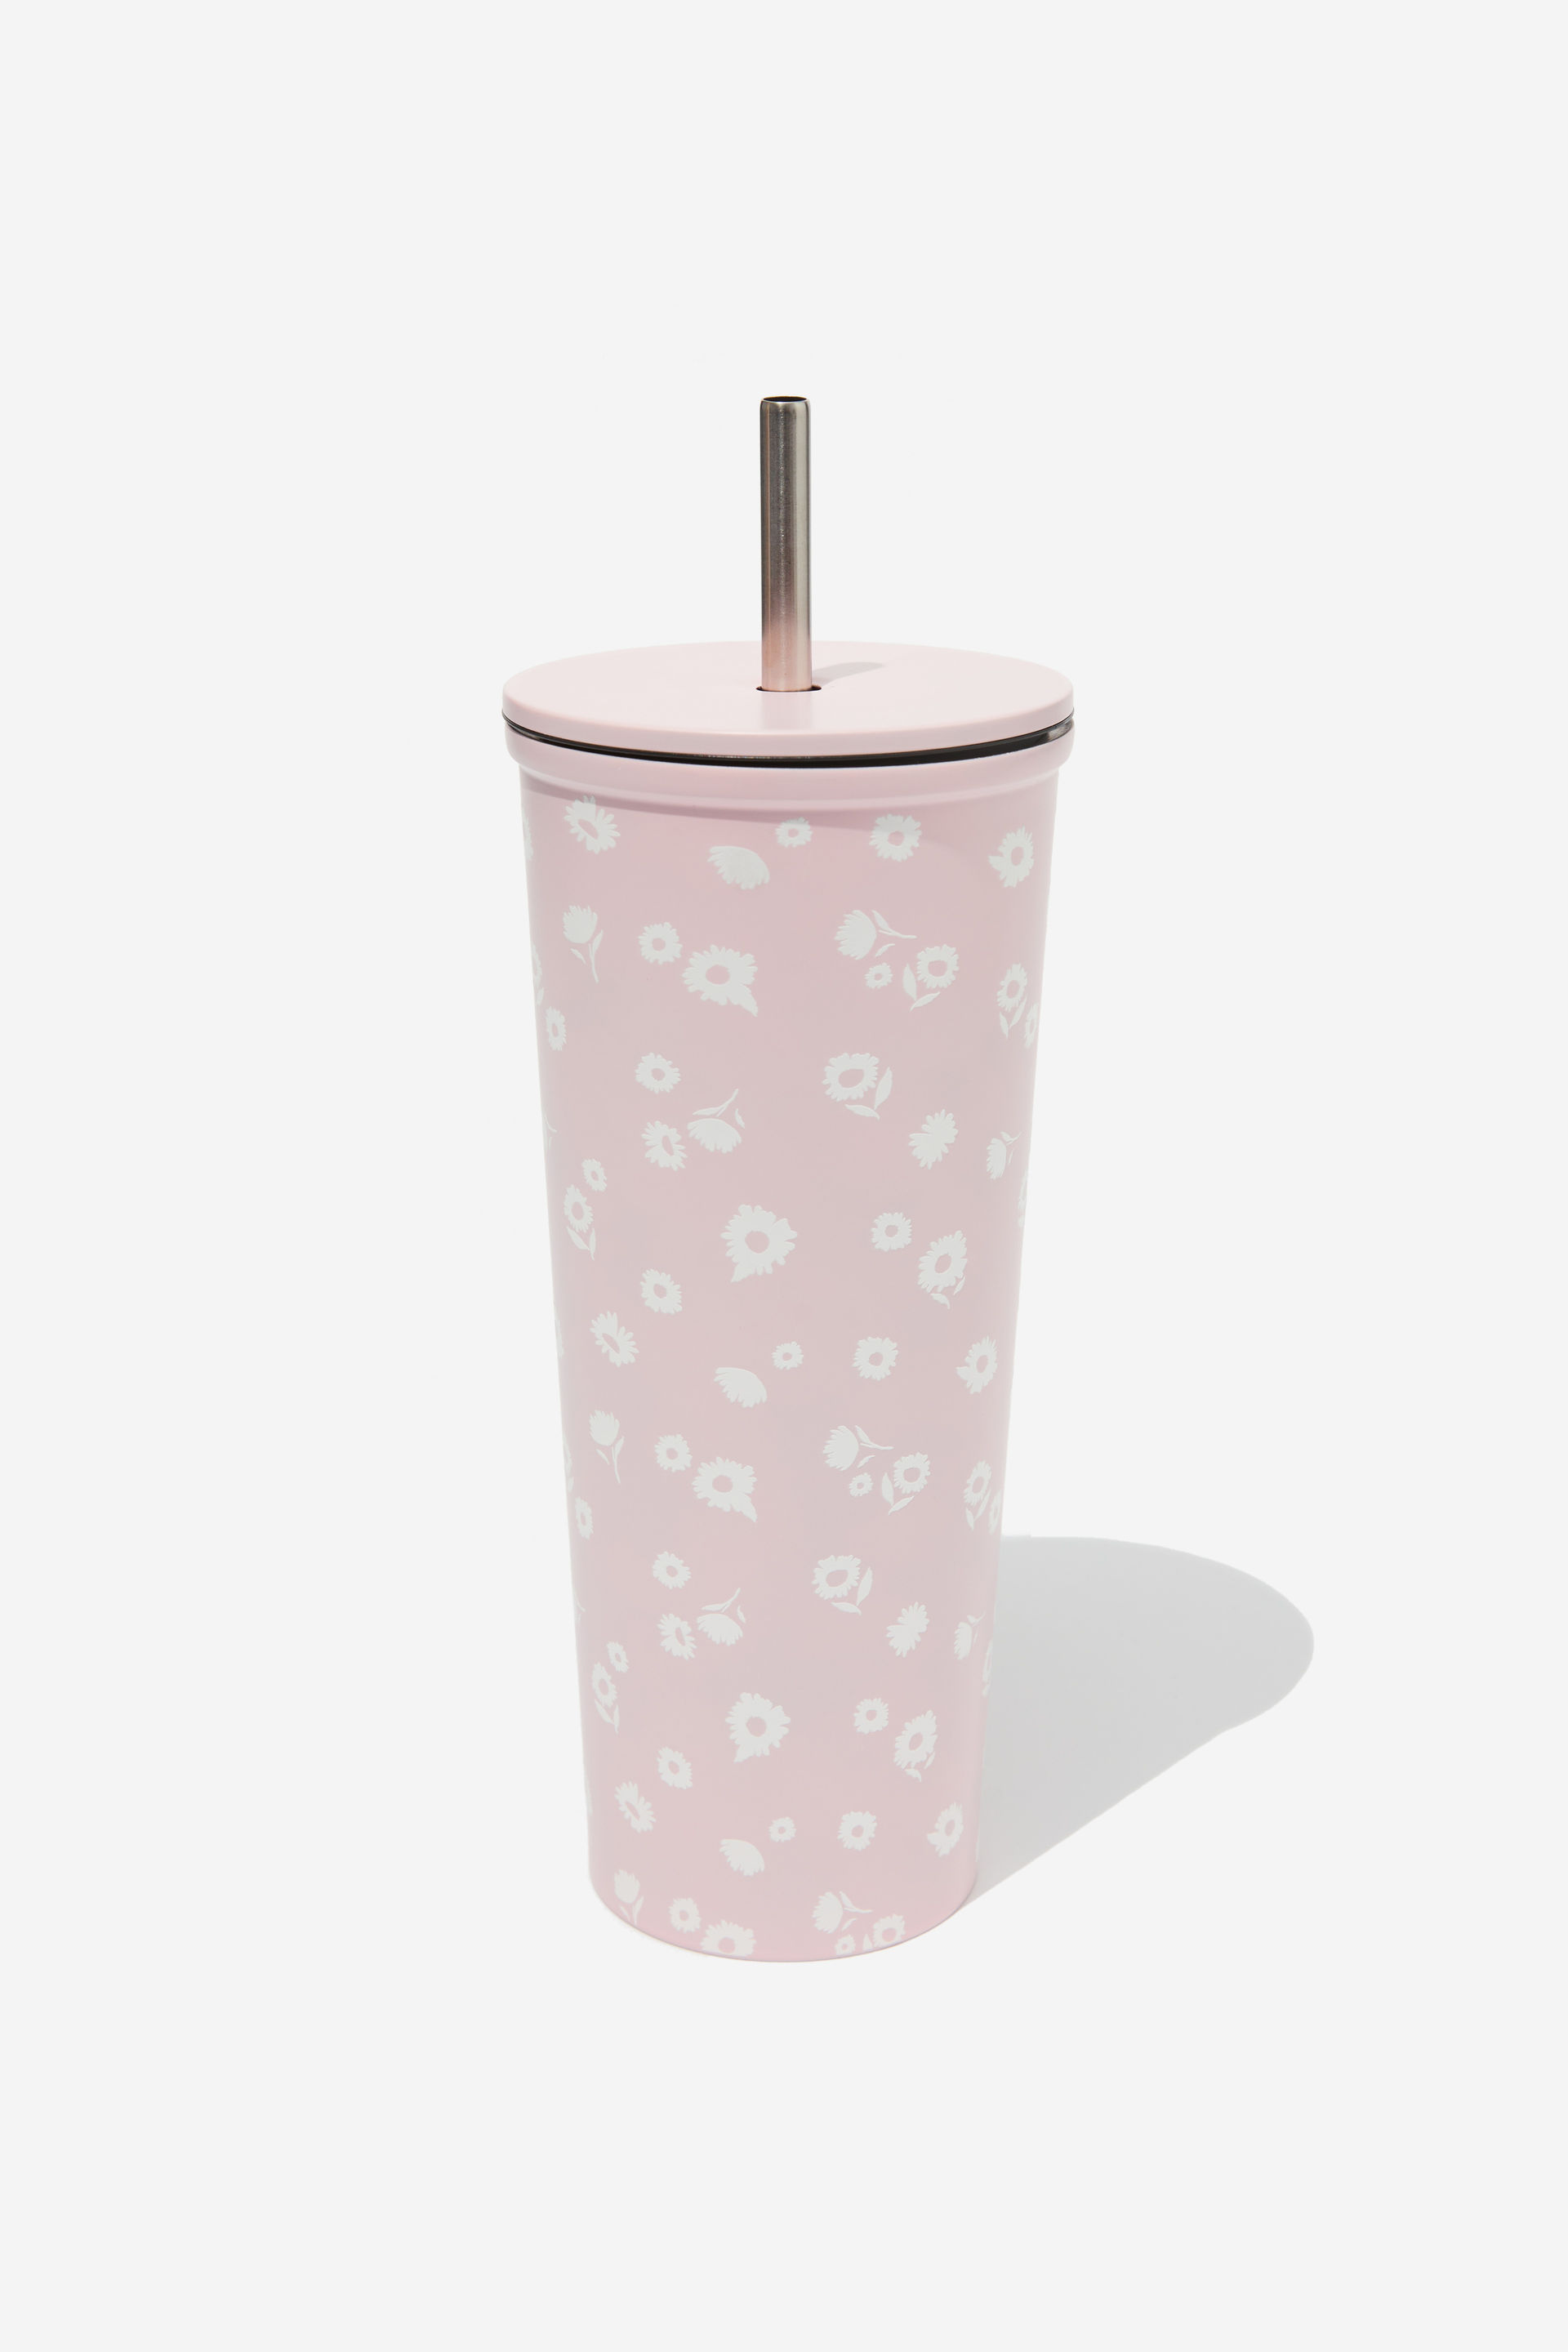 Typo - Metal Smoothie Cup - Daisy ditsy blush